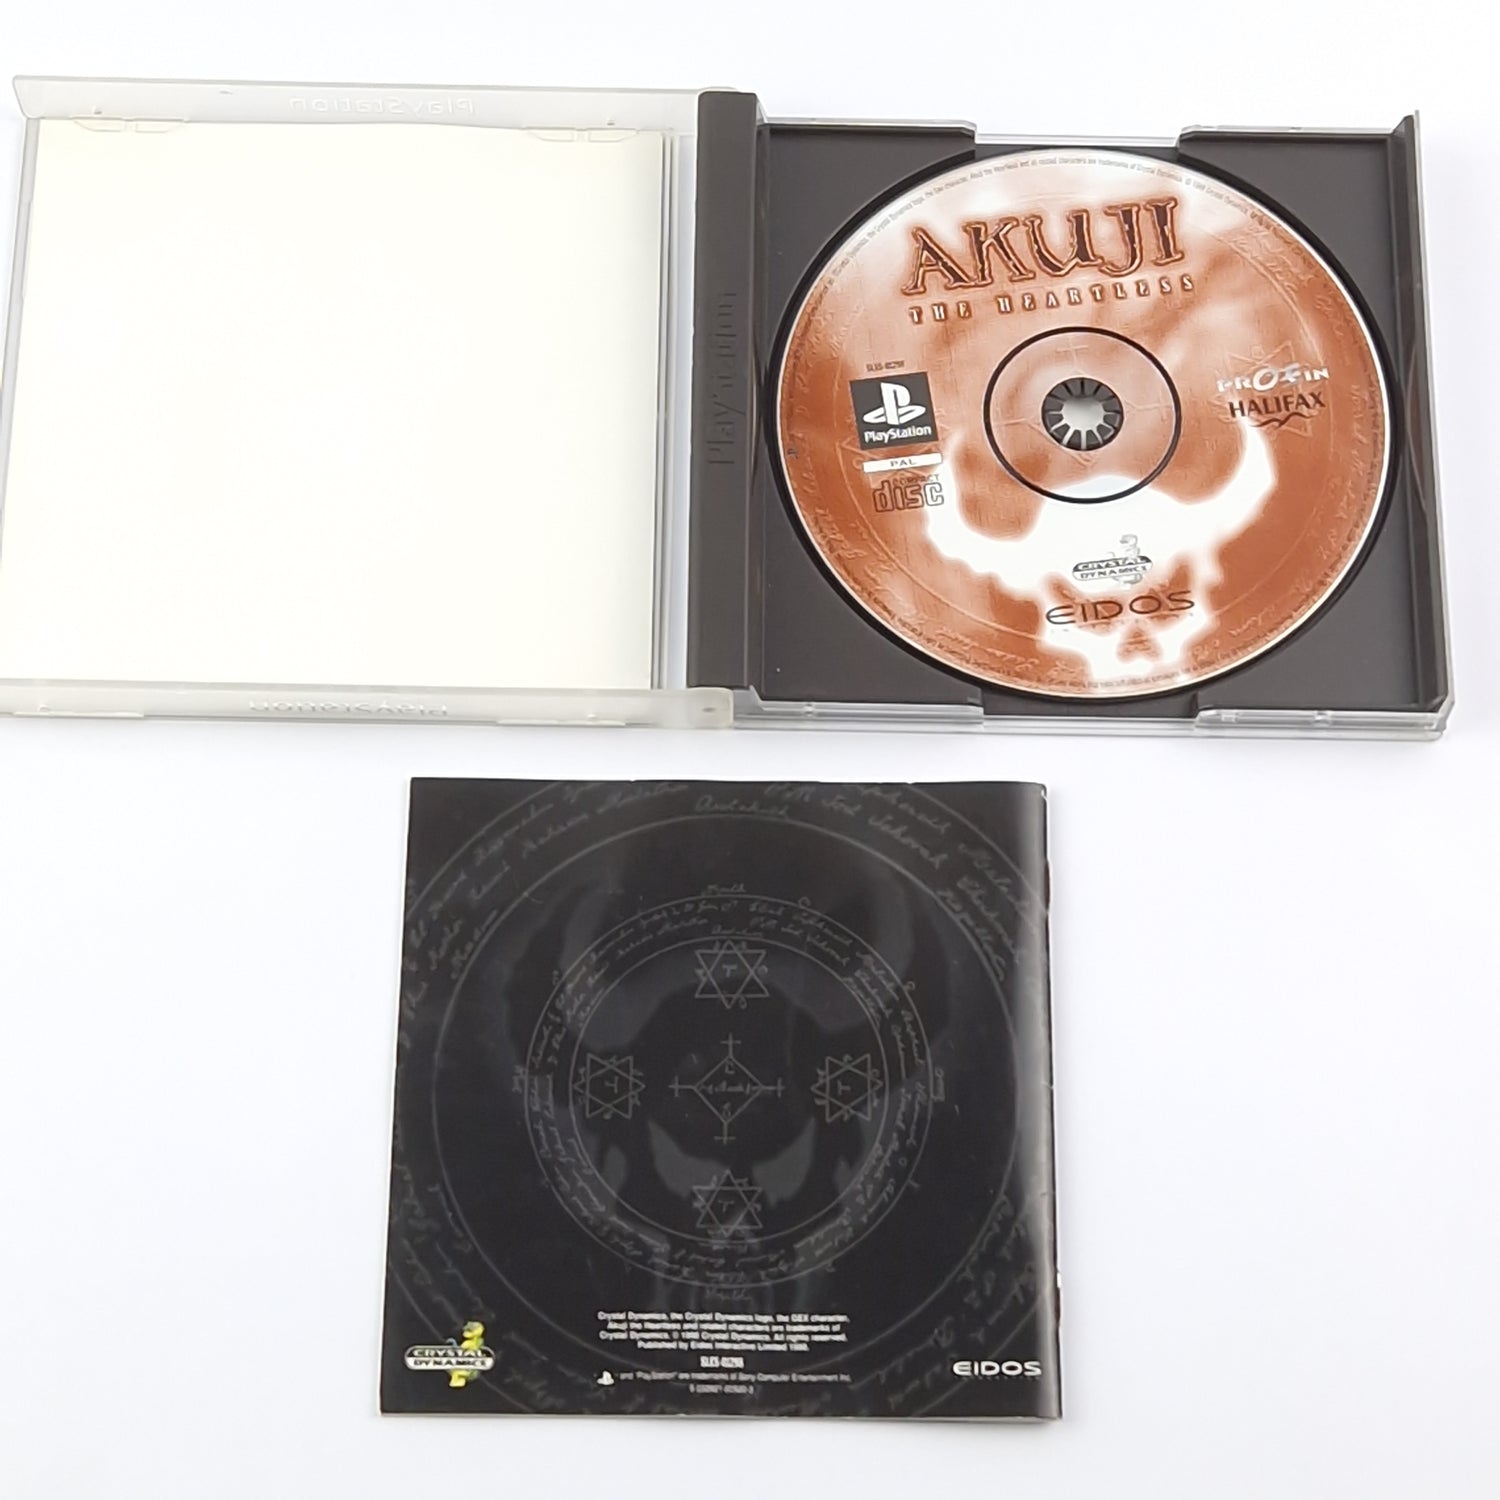 Sony Playstation 1 Spiel : Akuji The Heartless - OVP Anleitung - PS1 PSX PAL